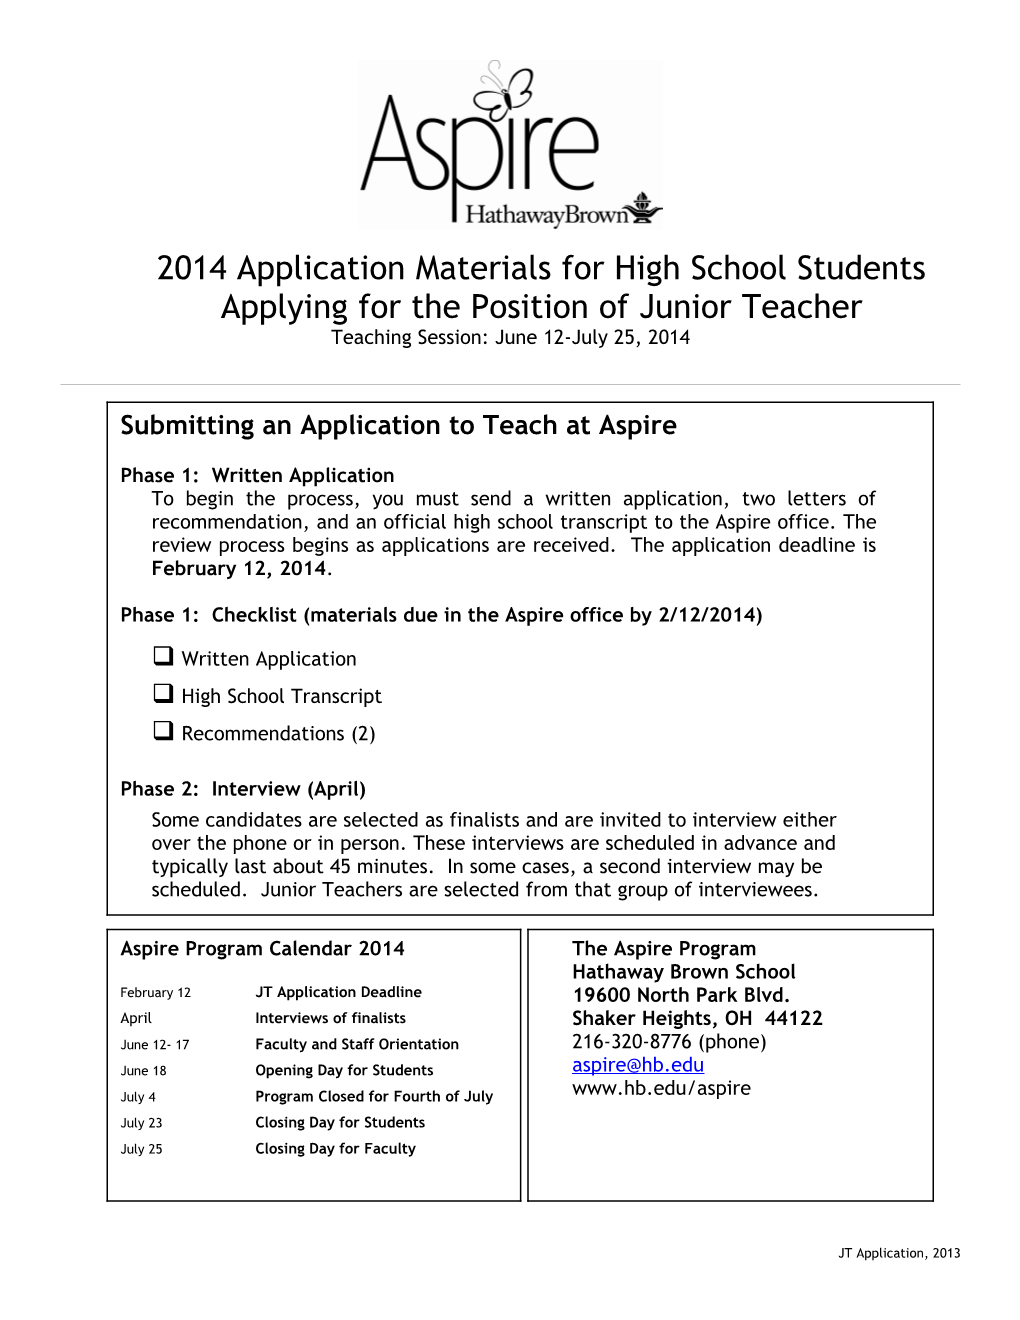 2014Application Materials for High School Students Applying for the Position of Junior Teacher